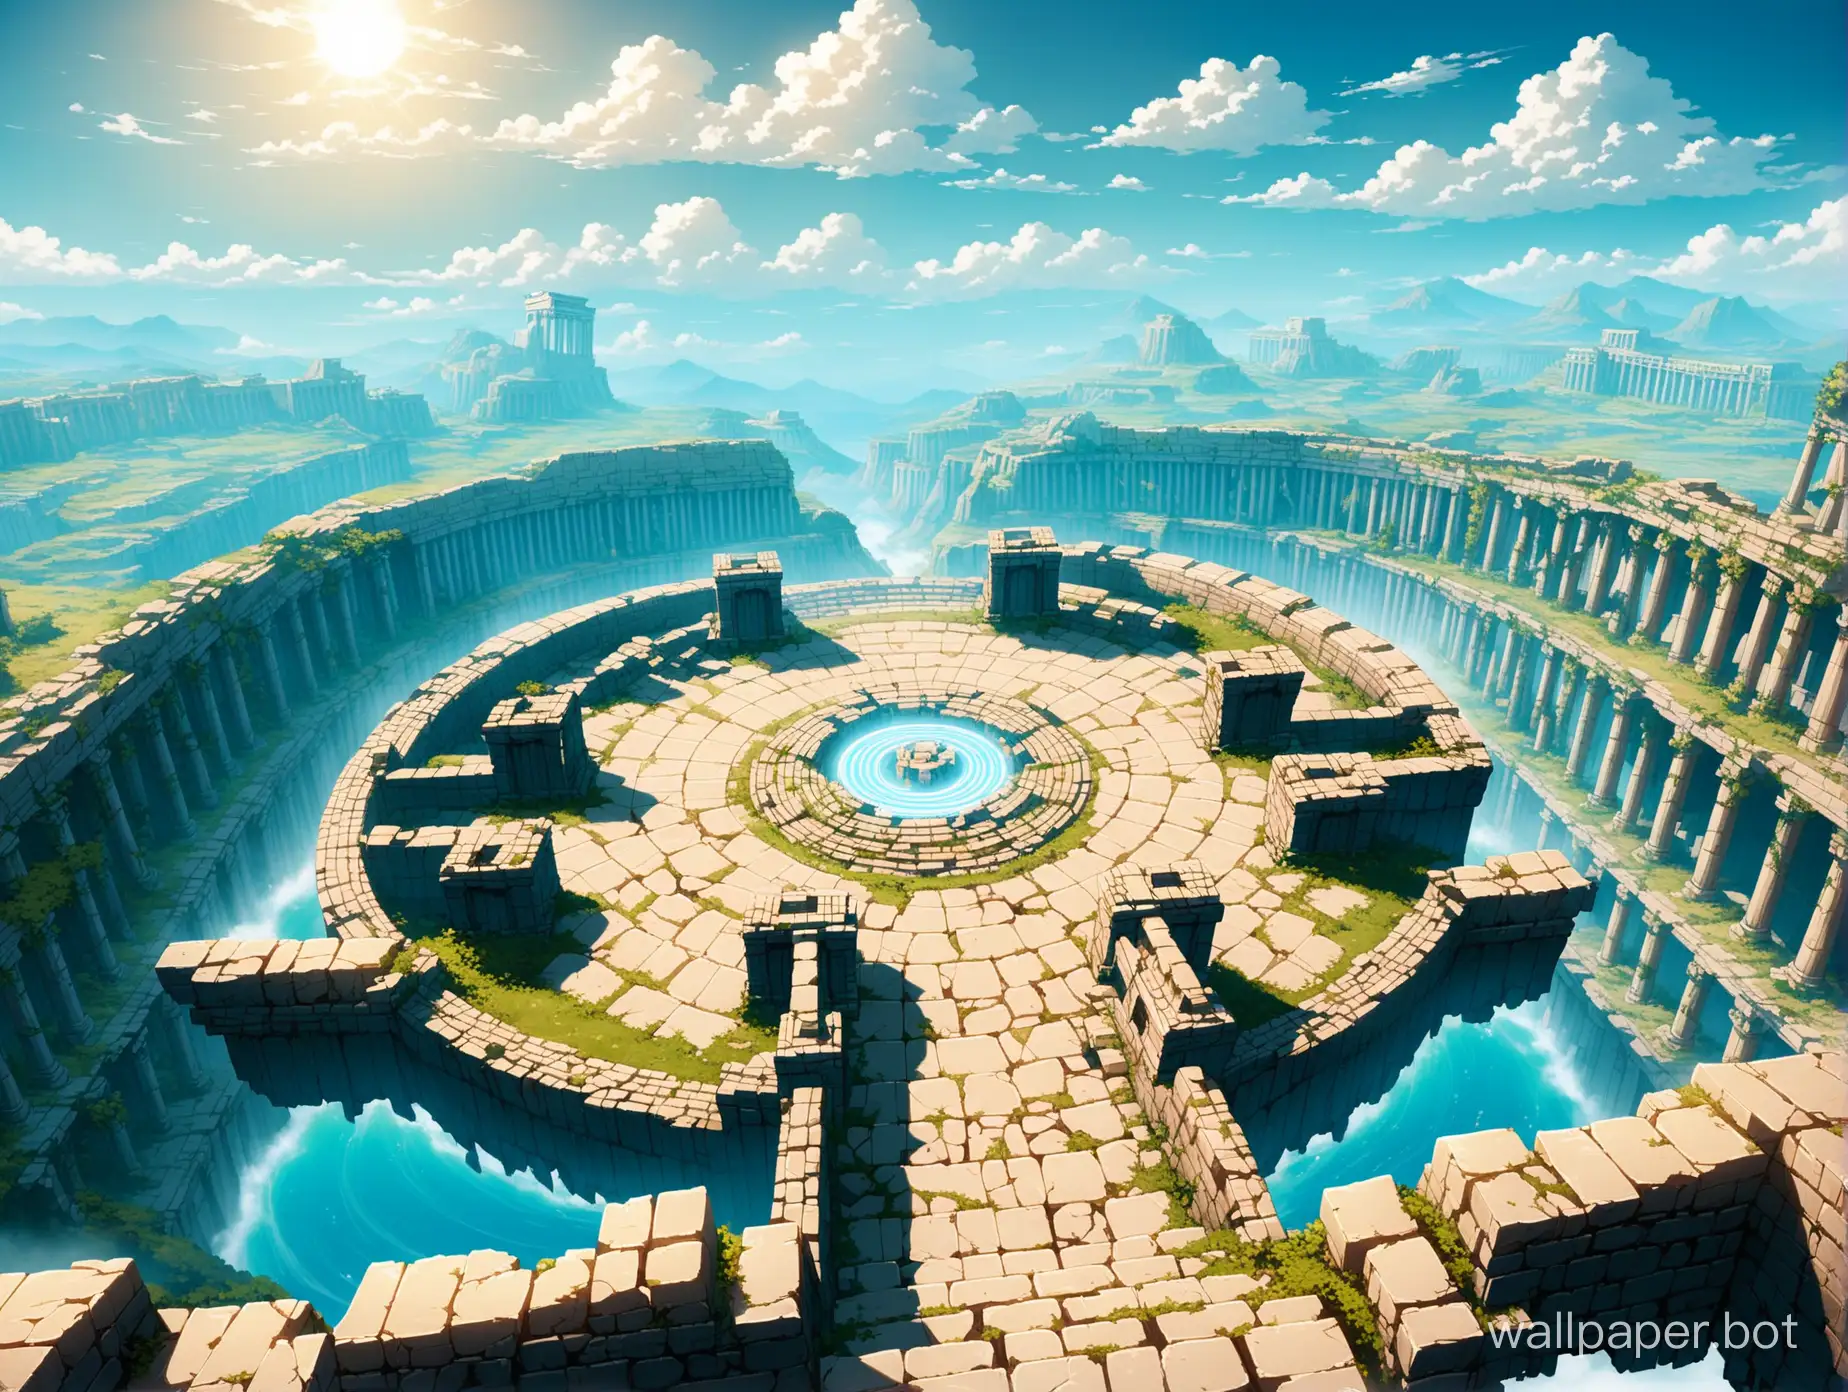 greek mythic battleplain of the gods, elysium ruins in the sky, fighting videogame stage